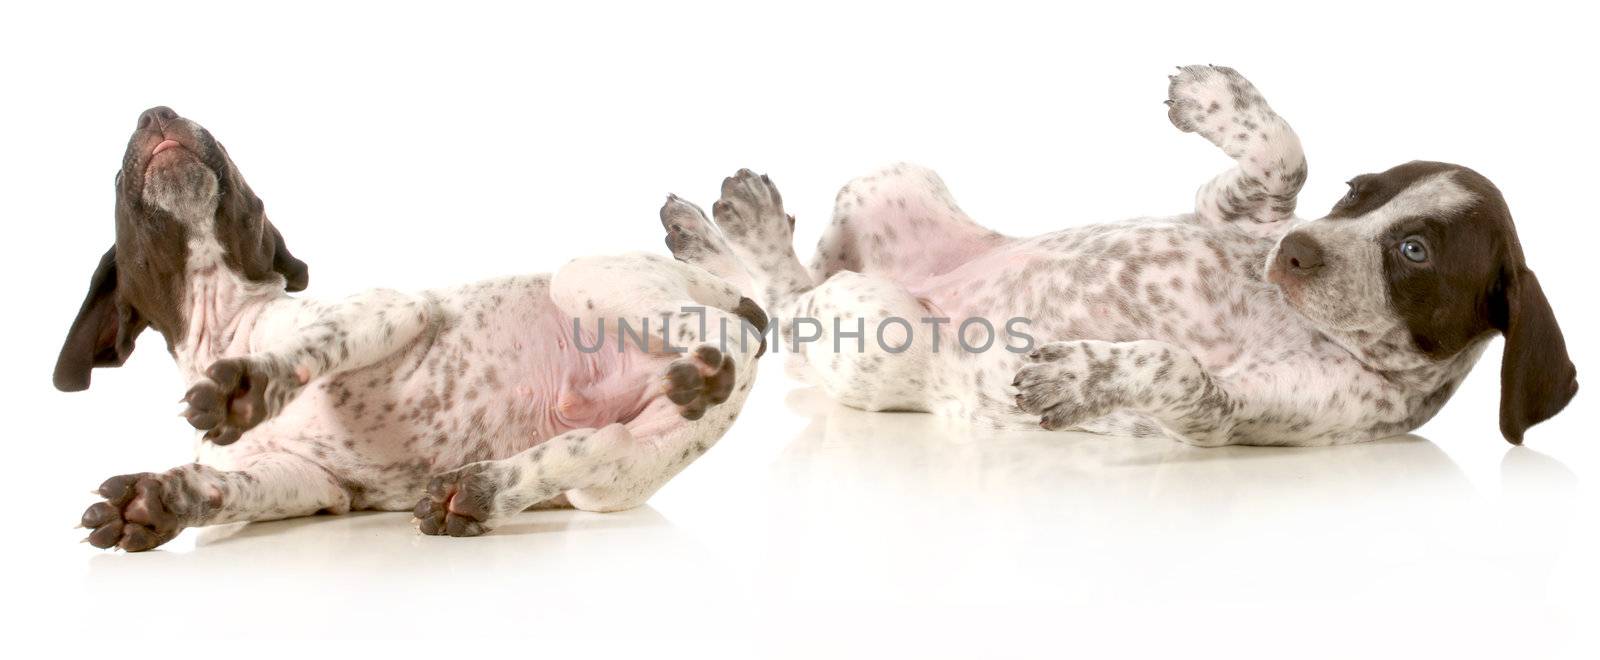 puppies playing - two german shorthaired pointer puppies rolling on backs isolated on white background - 5 weeks old